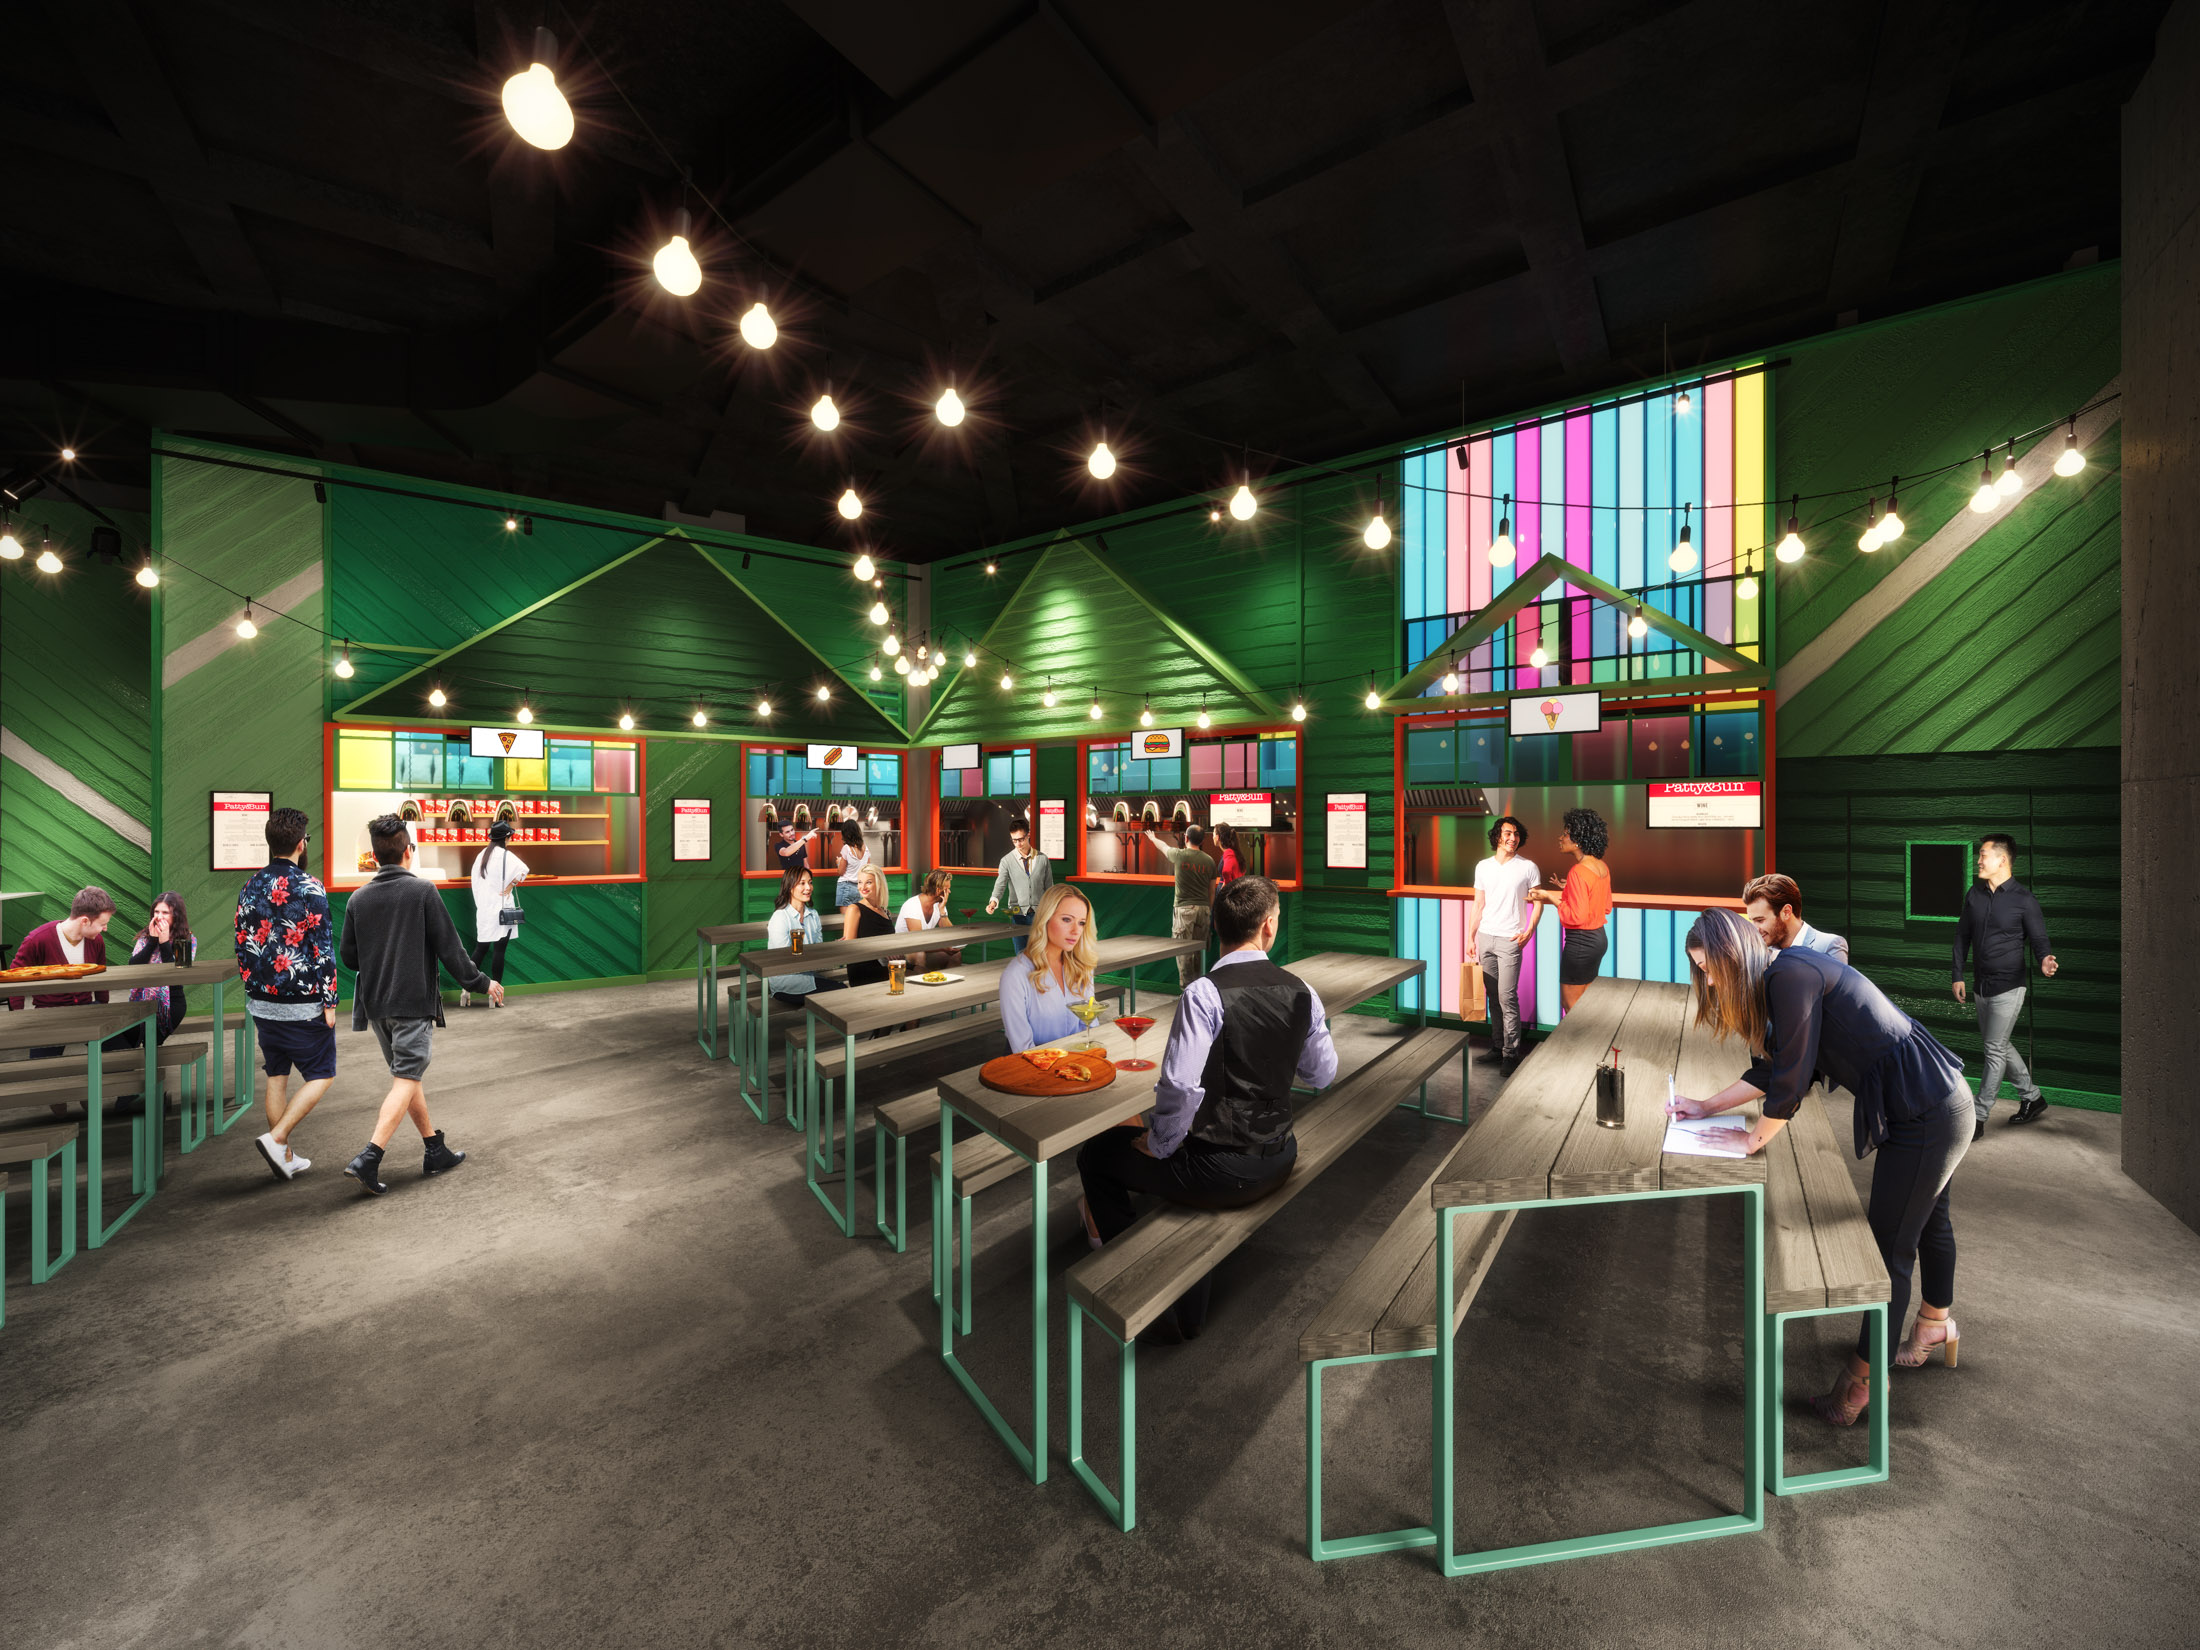 Indoor Crazy Golf Swingers Mini Golf to Open in NYC This Summer image pic